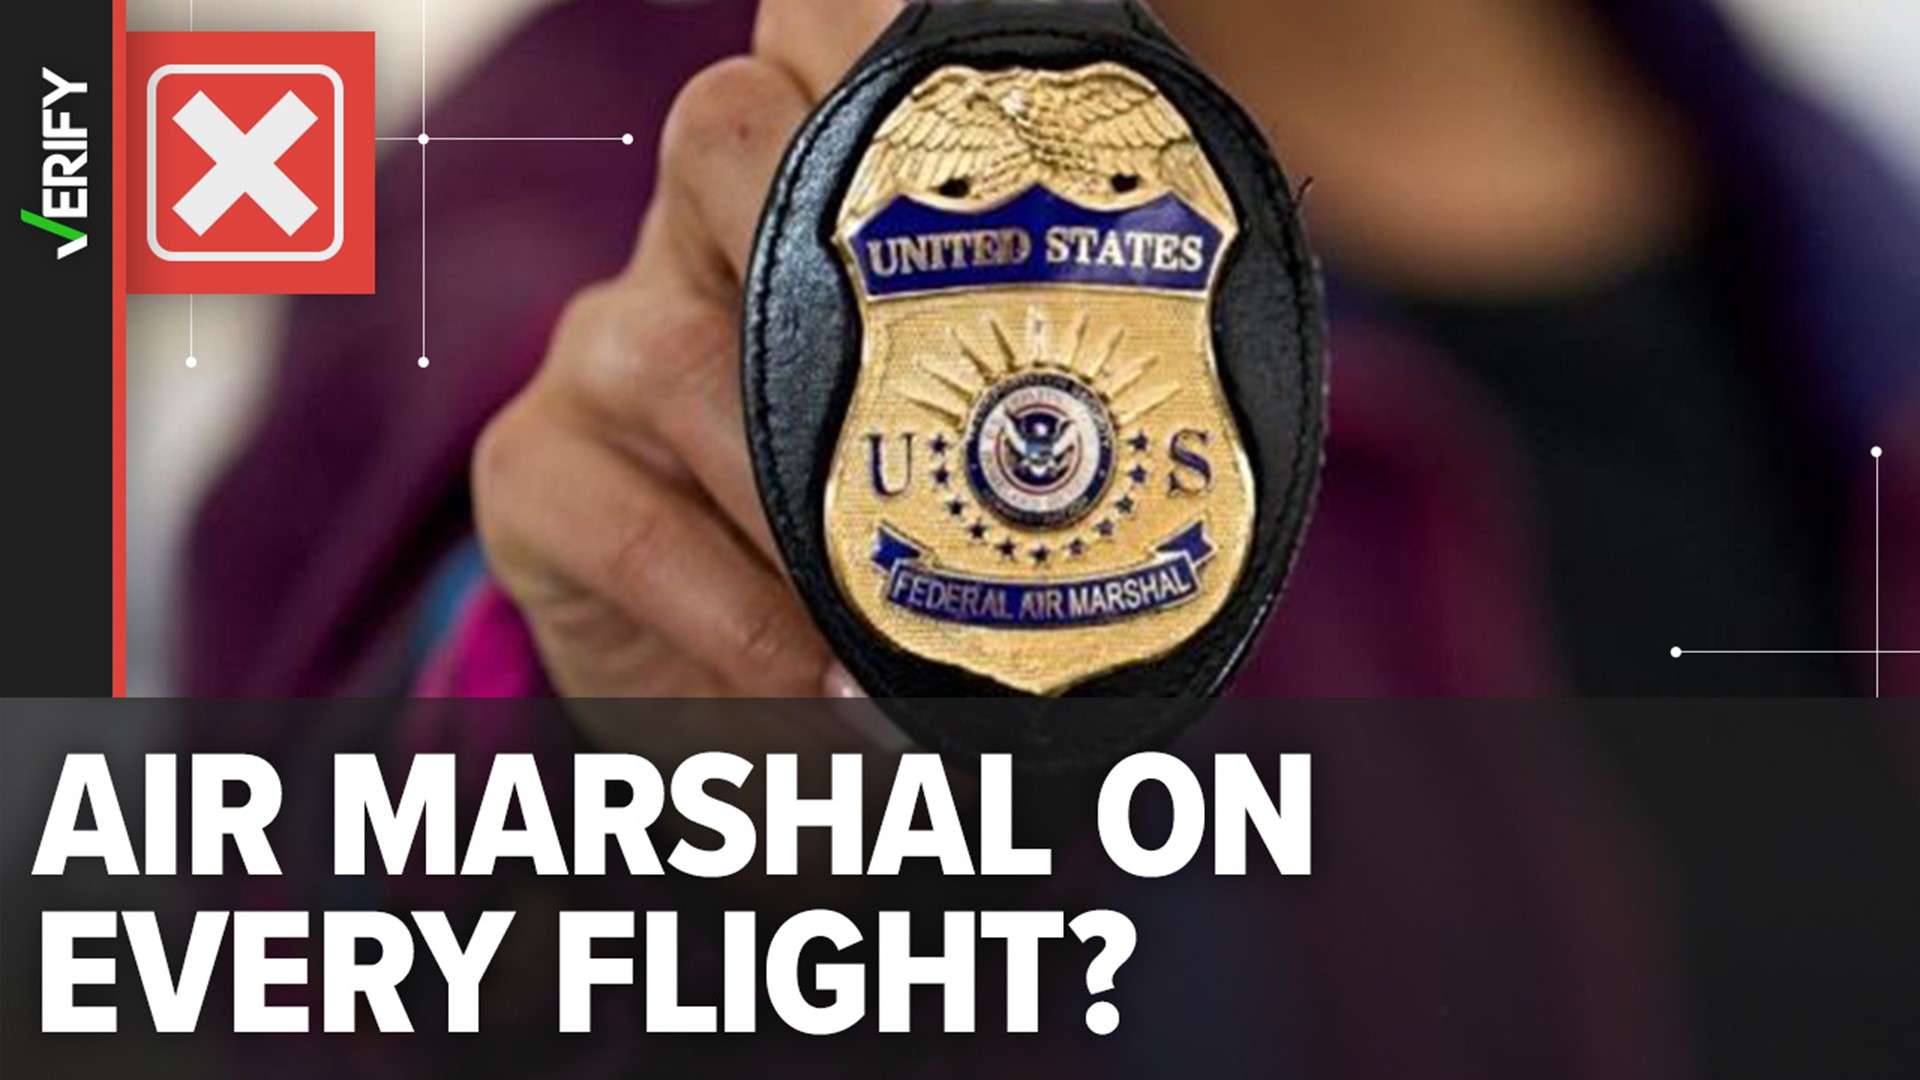 A VERIFY reader asked if there are law enforcement officers on every plane. There aren’t enough marshals for that.